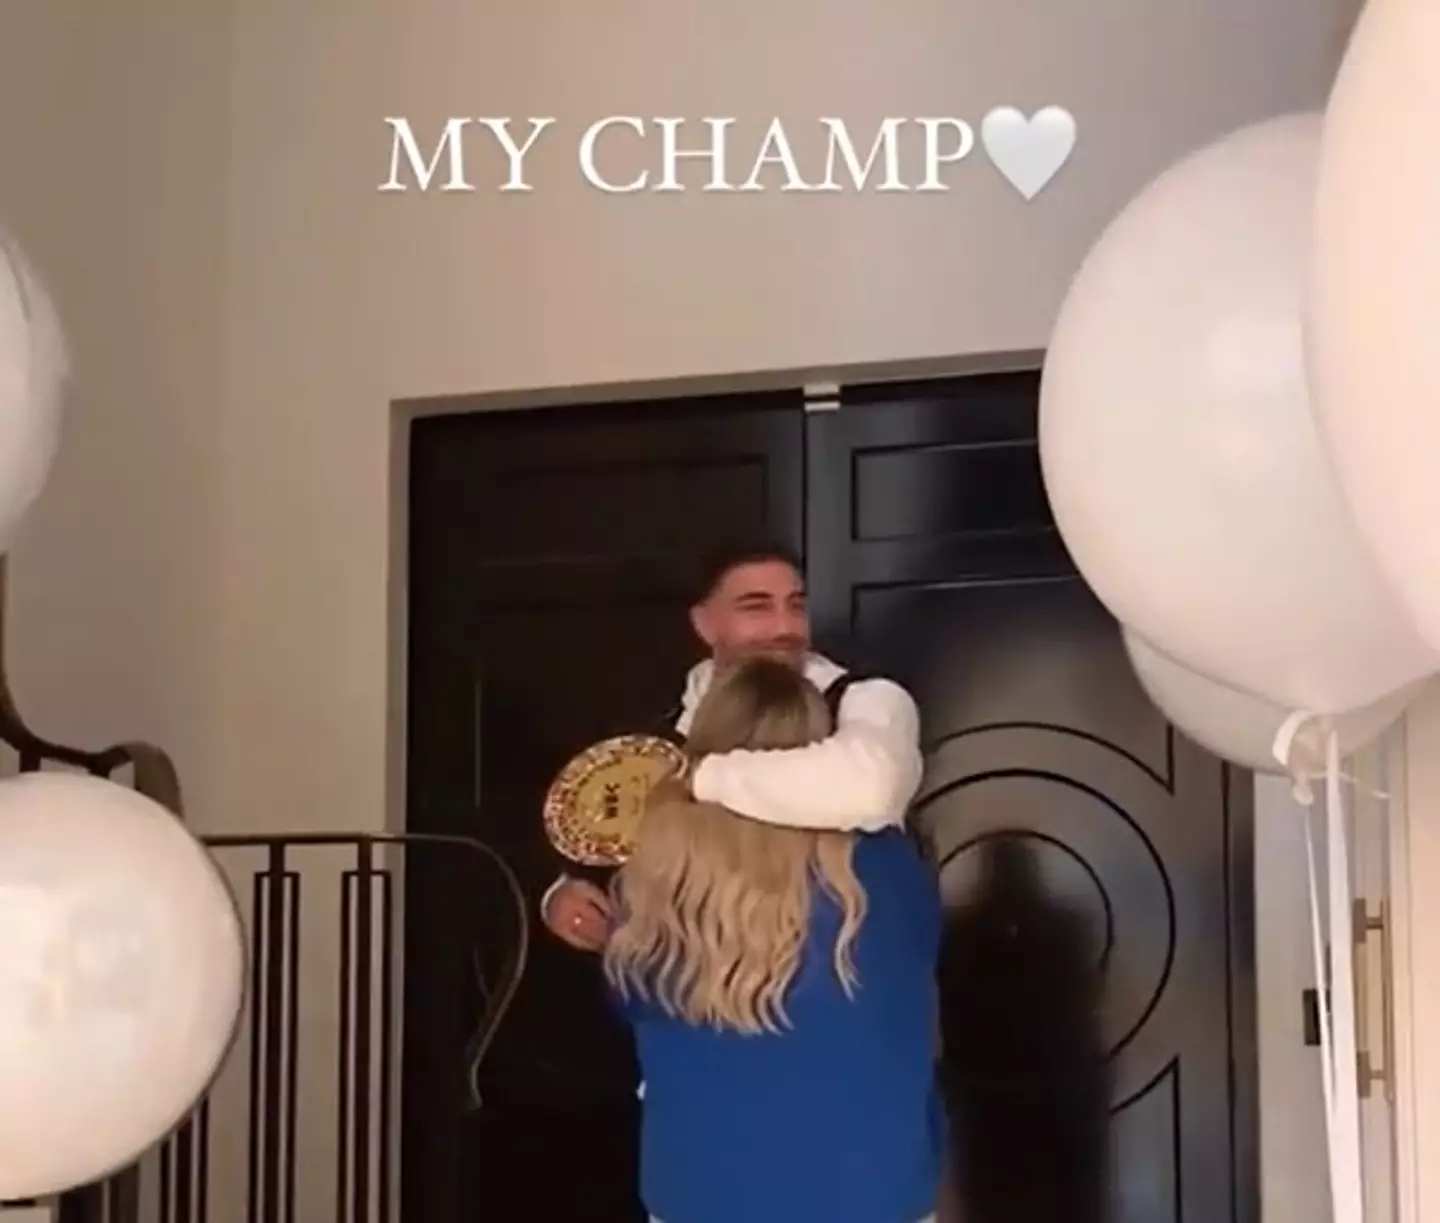 Molly-Mae welcomed Tommy Fury home after his boxing win.